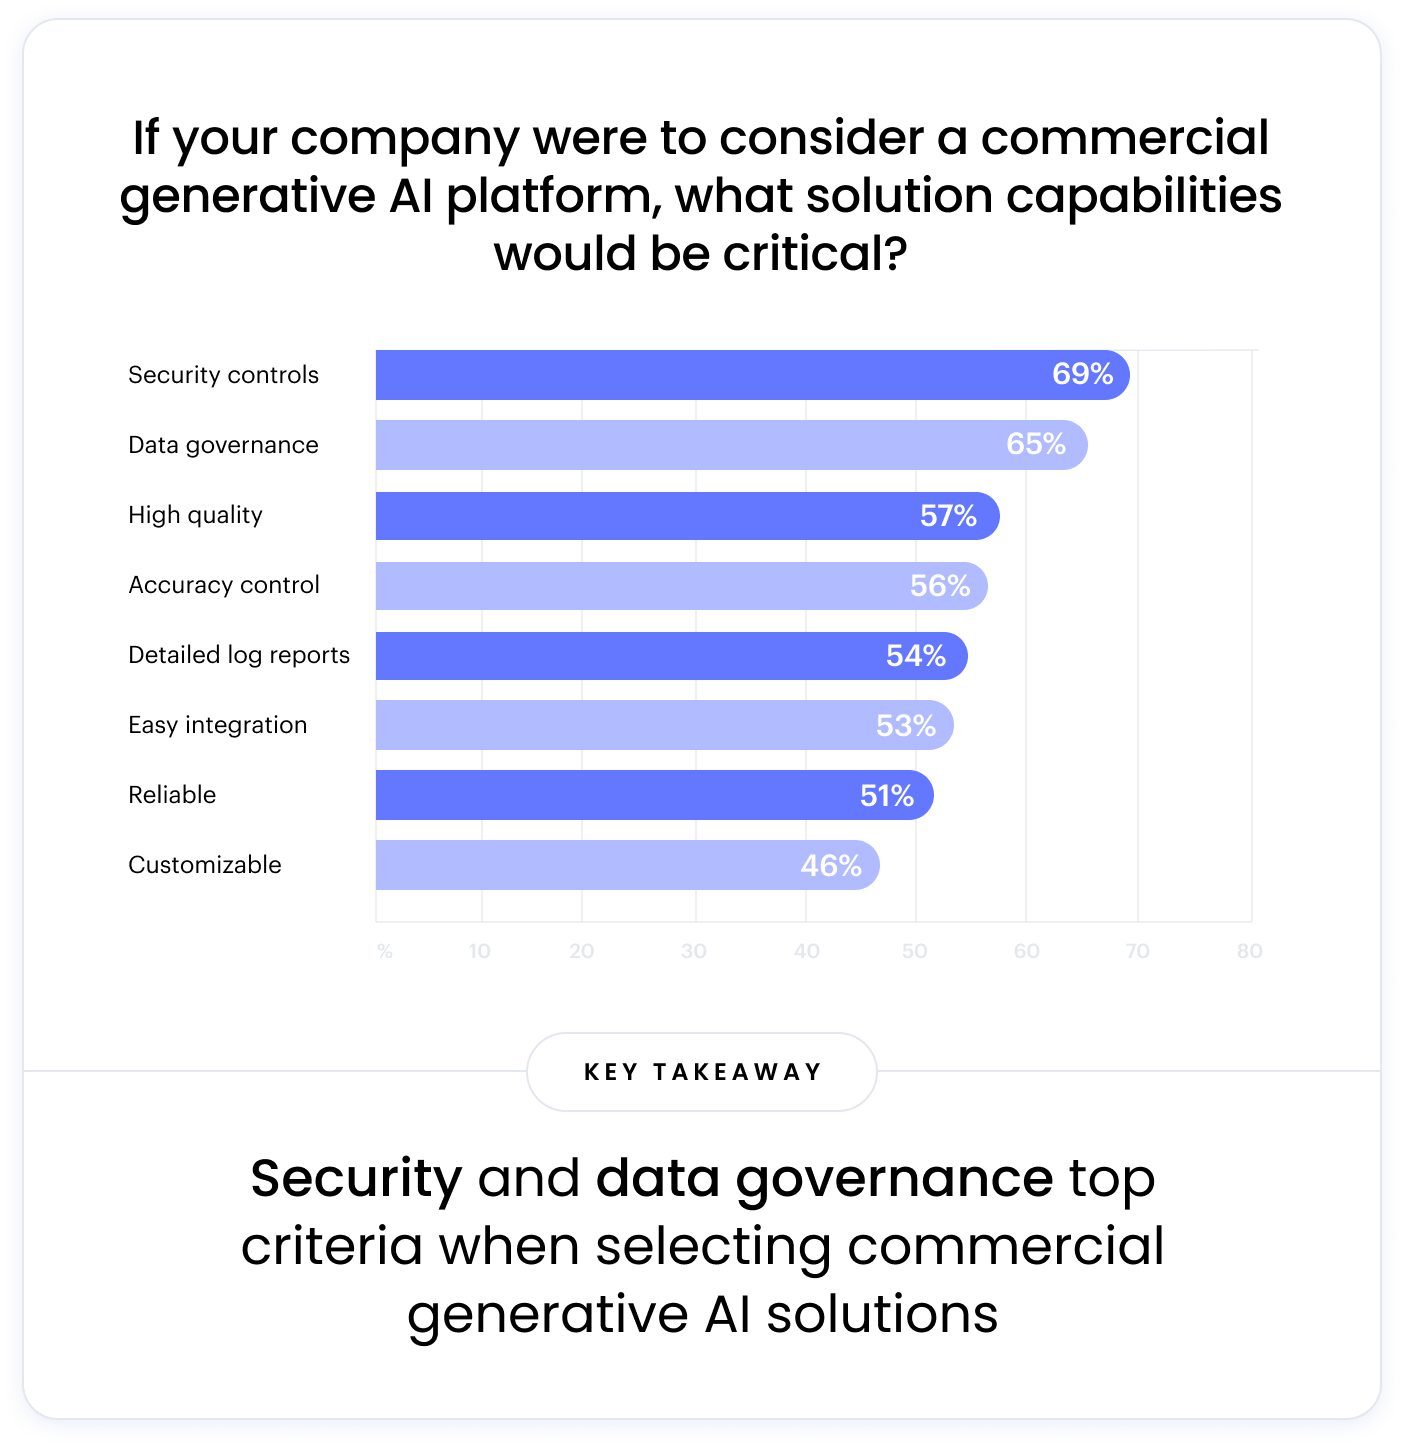 The image depicts a bar chart of the essential features companies look for in a commercial generative AI platform. Topping the list are security controls (69%) and data governance (65%). Following closely are high quality (57%), accuracy control (56%), detailed log reports (54%), easy integration (53%), reliability (51%), and customizability (46%).